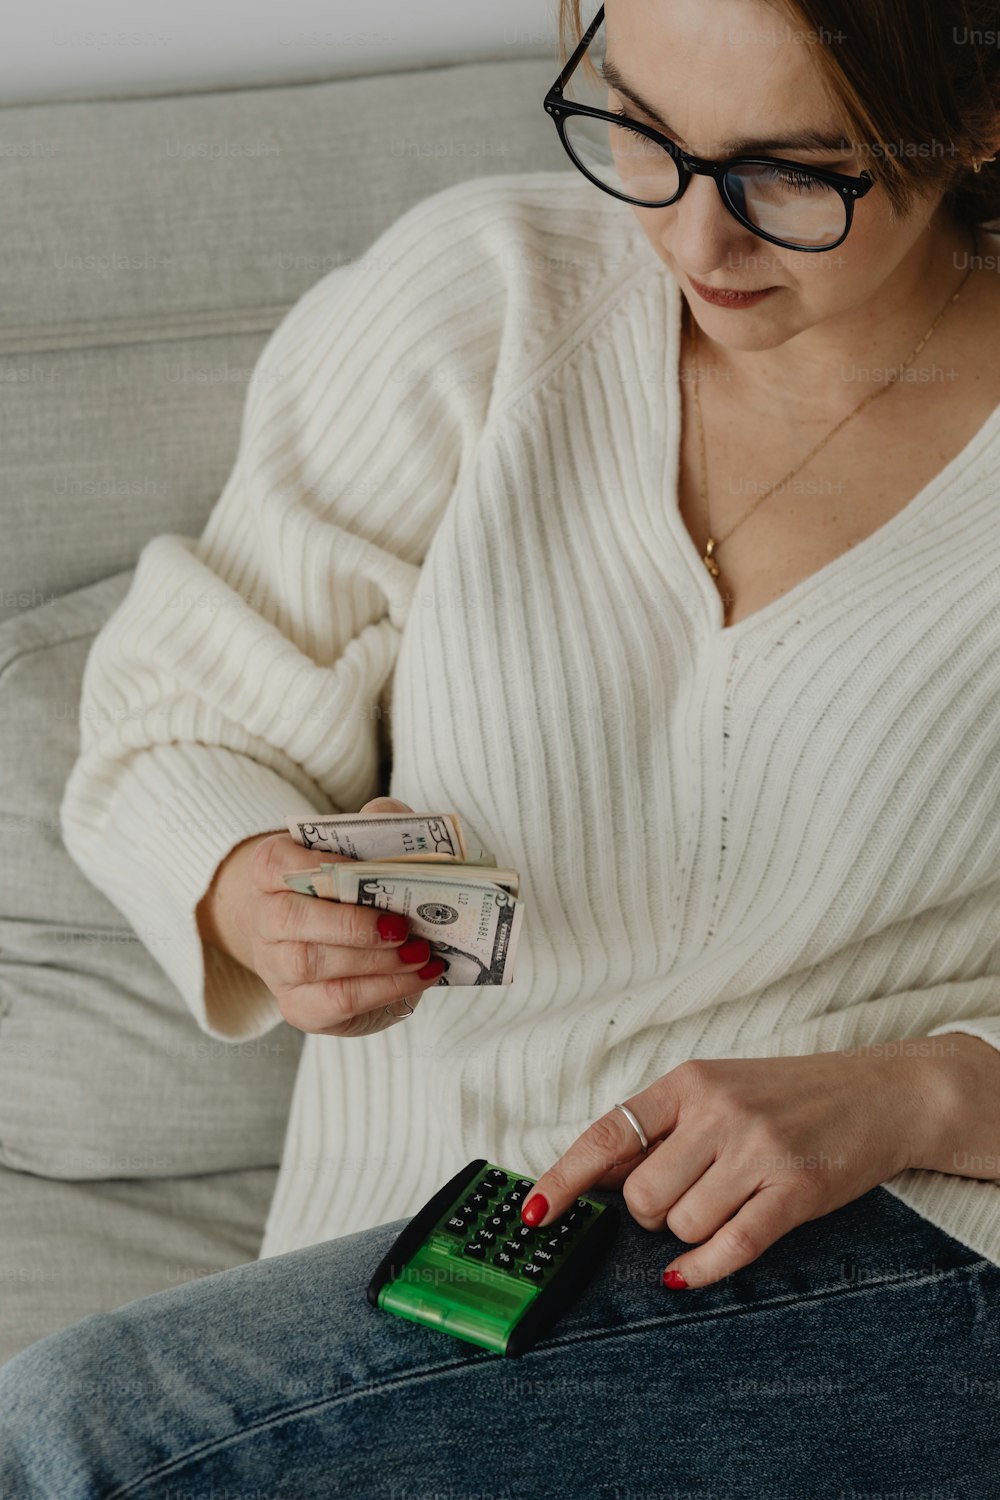 a woman sitting on a couch holding money and a cell phone